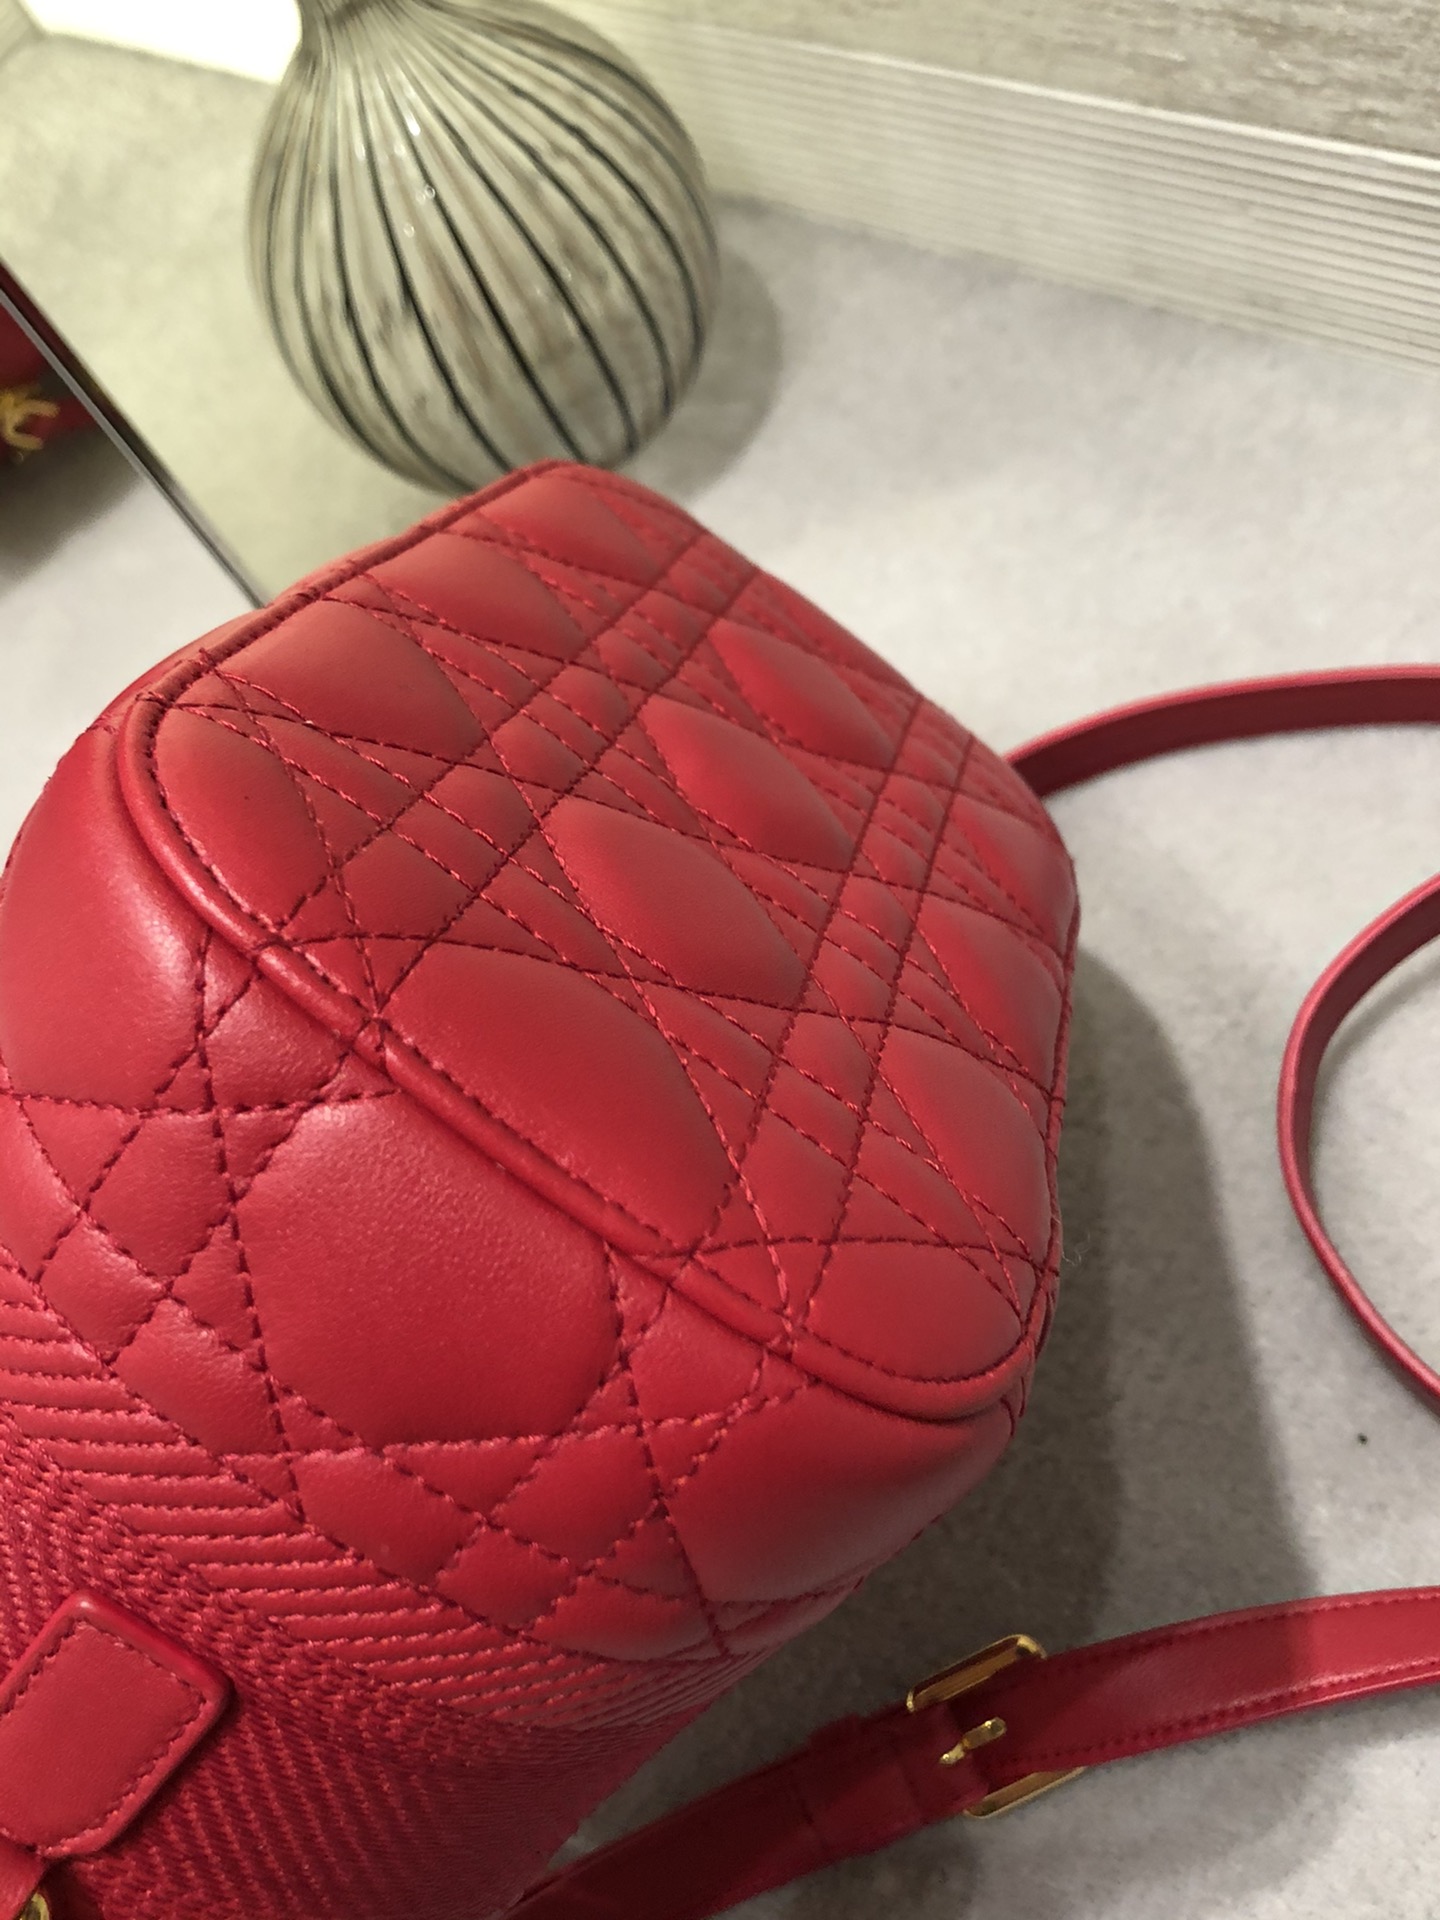 Replica Small DiorTravel Vanity Case Poppy Red Cannage Lambskin